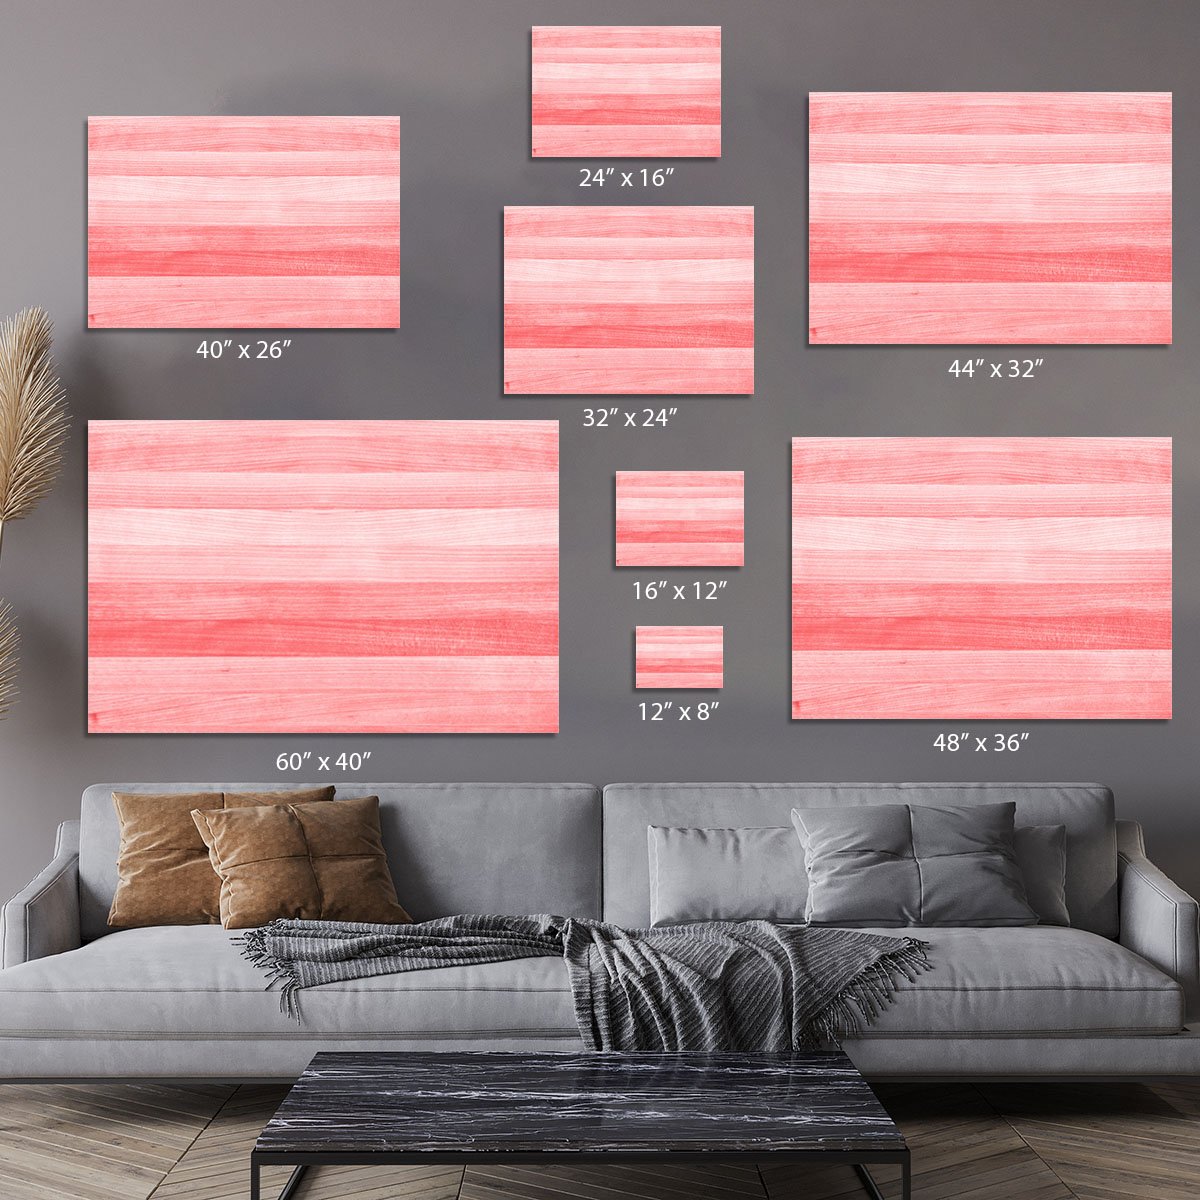 Coral pink or peach and salmon color Canvas Print or Poster